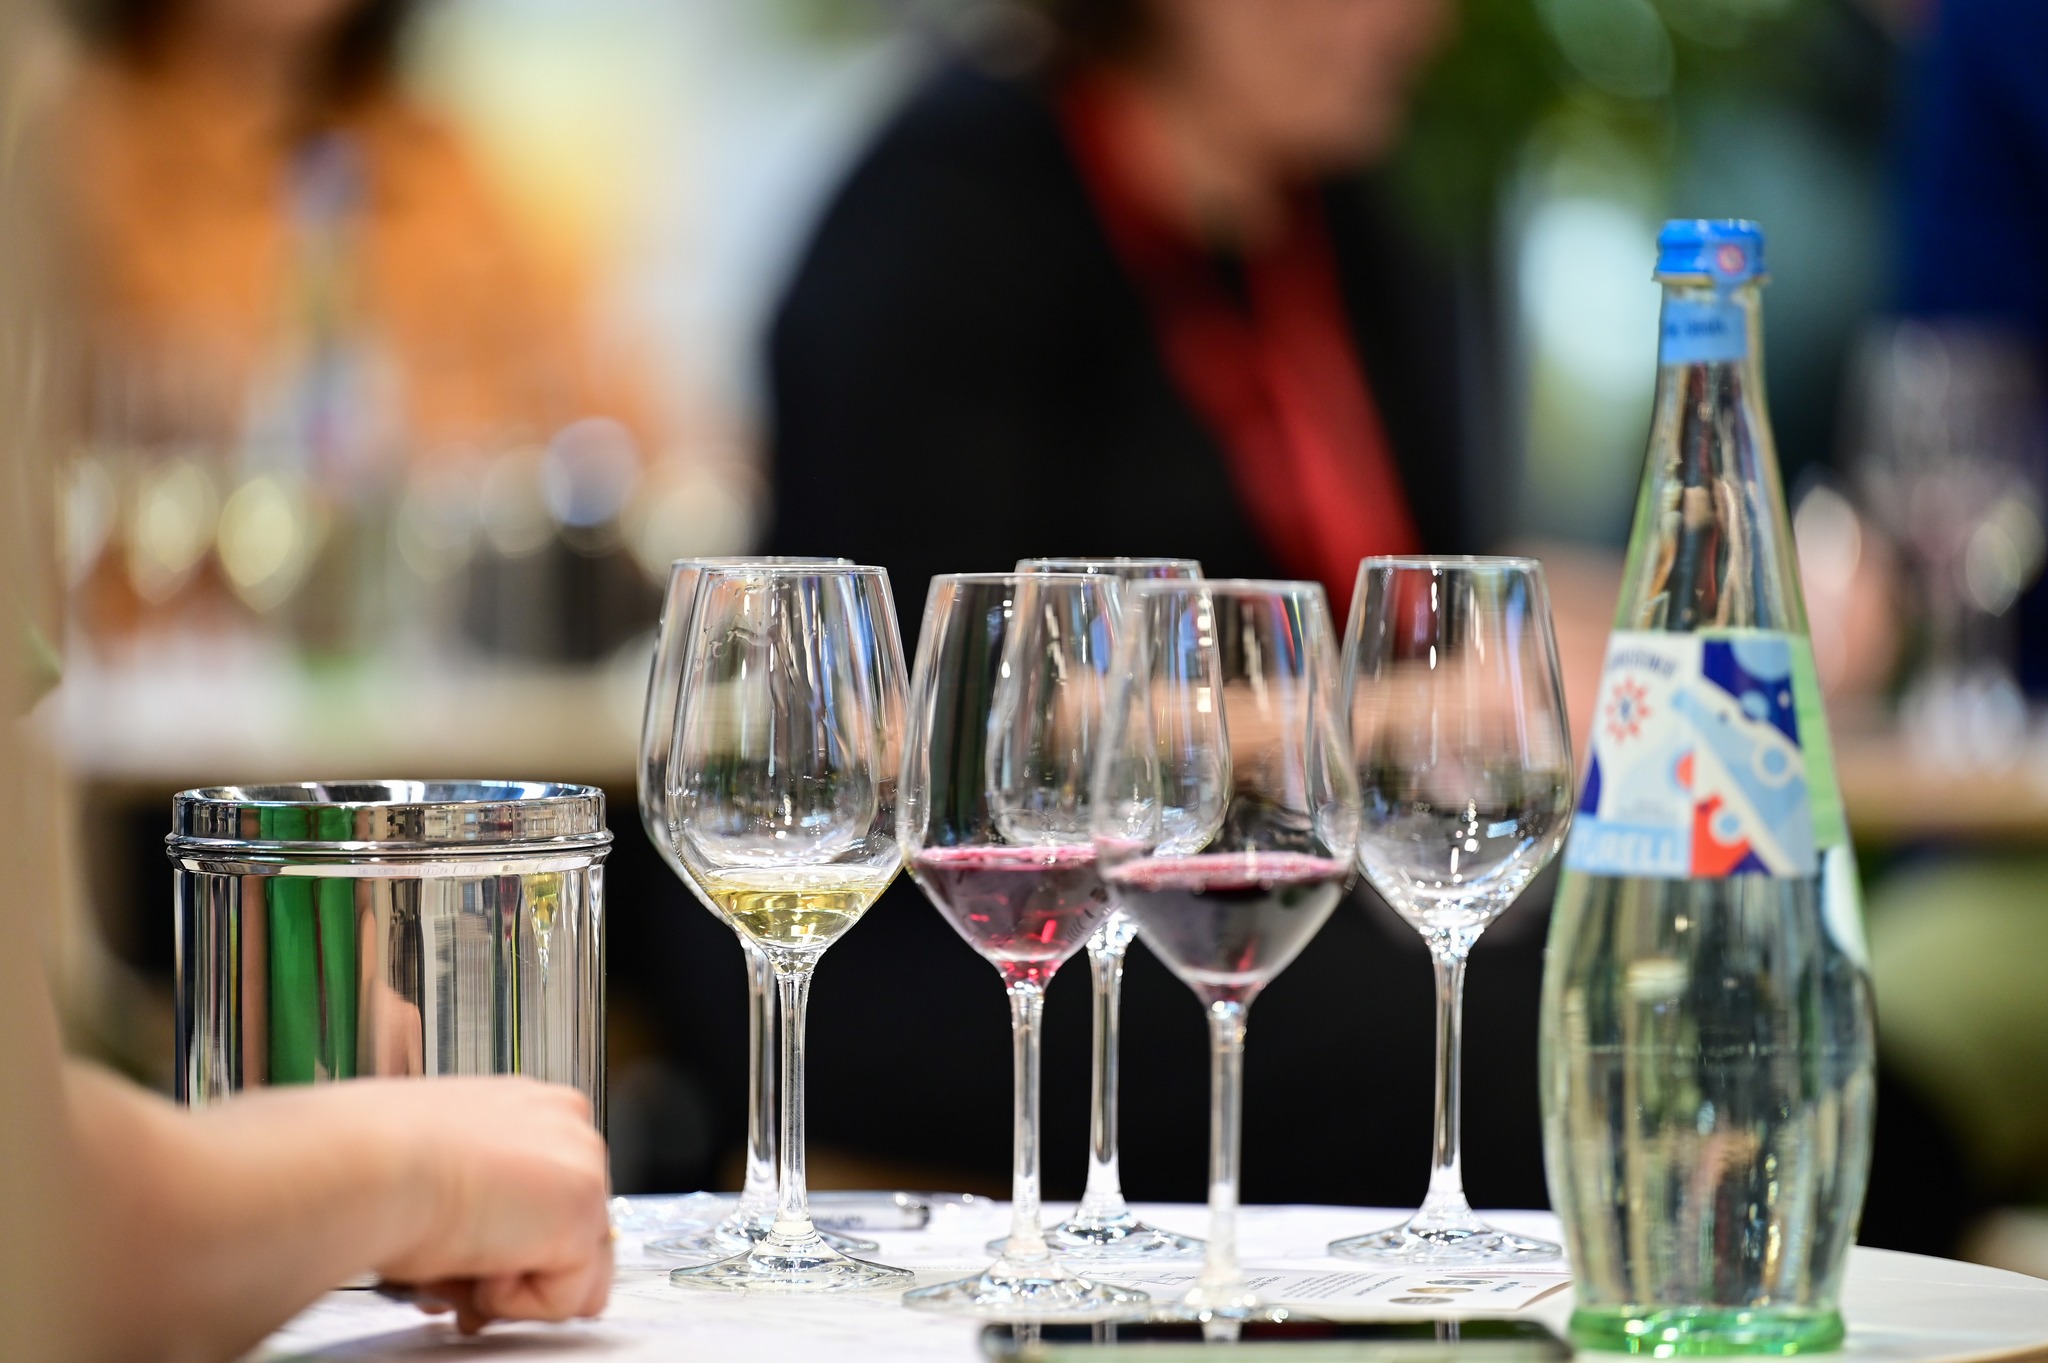 Over Hundred International Experts at the April Hungarian Wine Summit